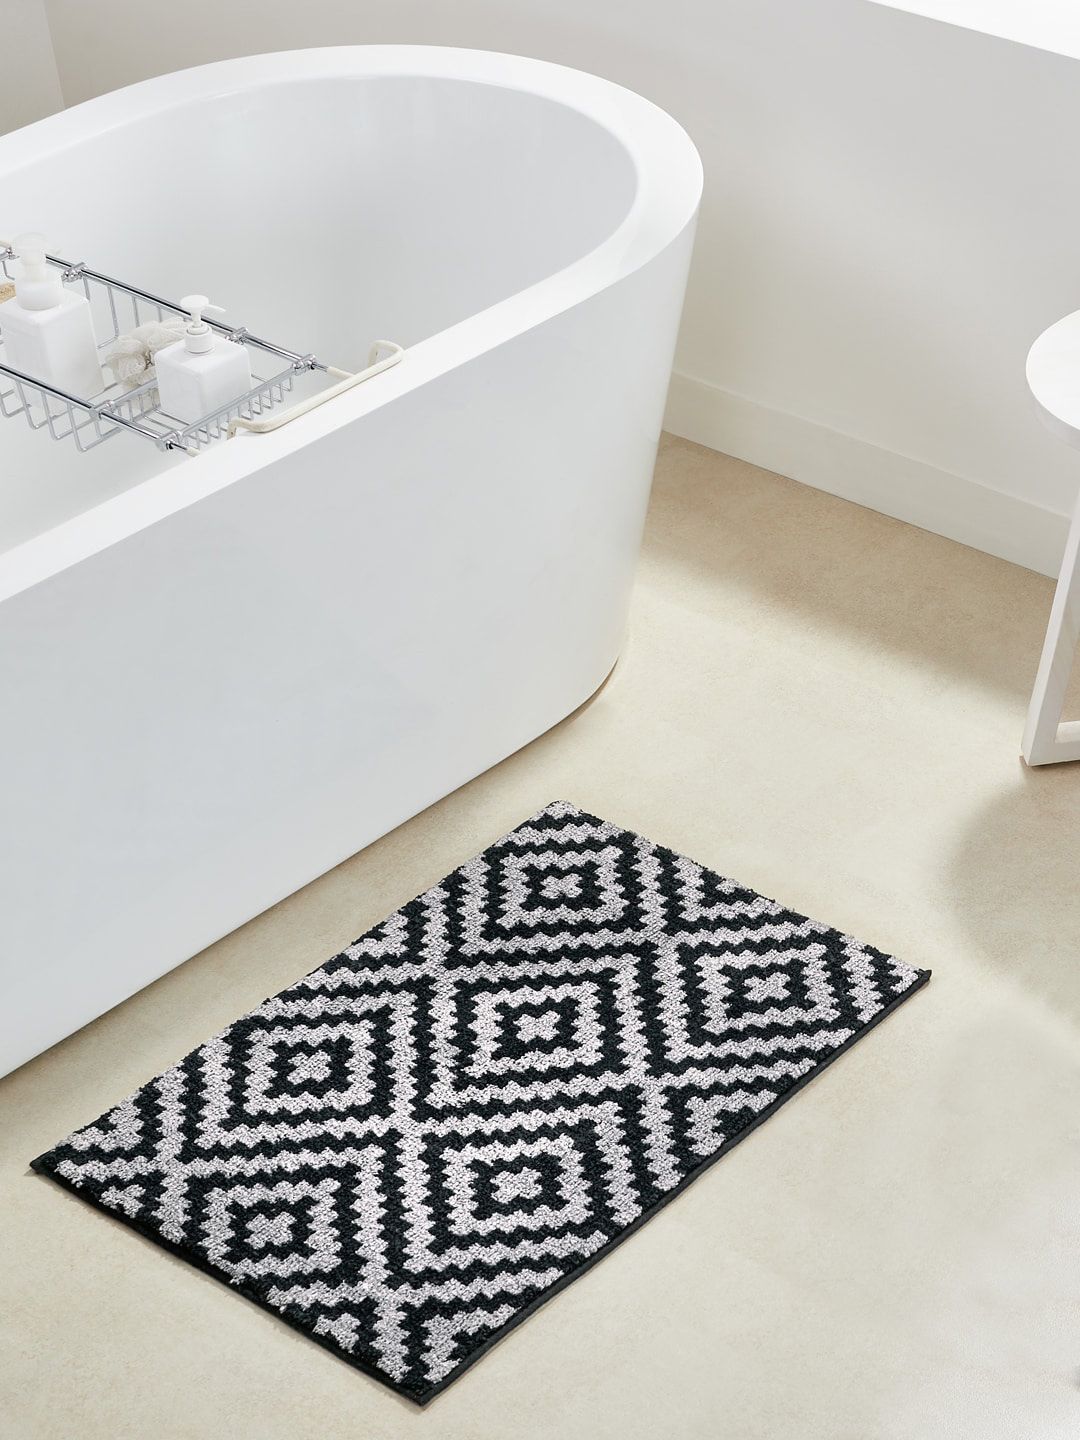 Pano Grey & Black Patterned 1902 GSM Bath Rugs Price in India